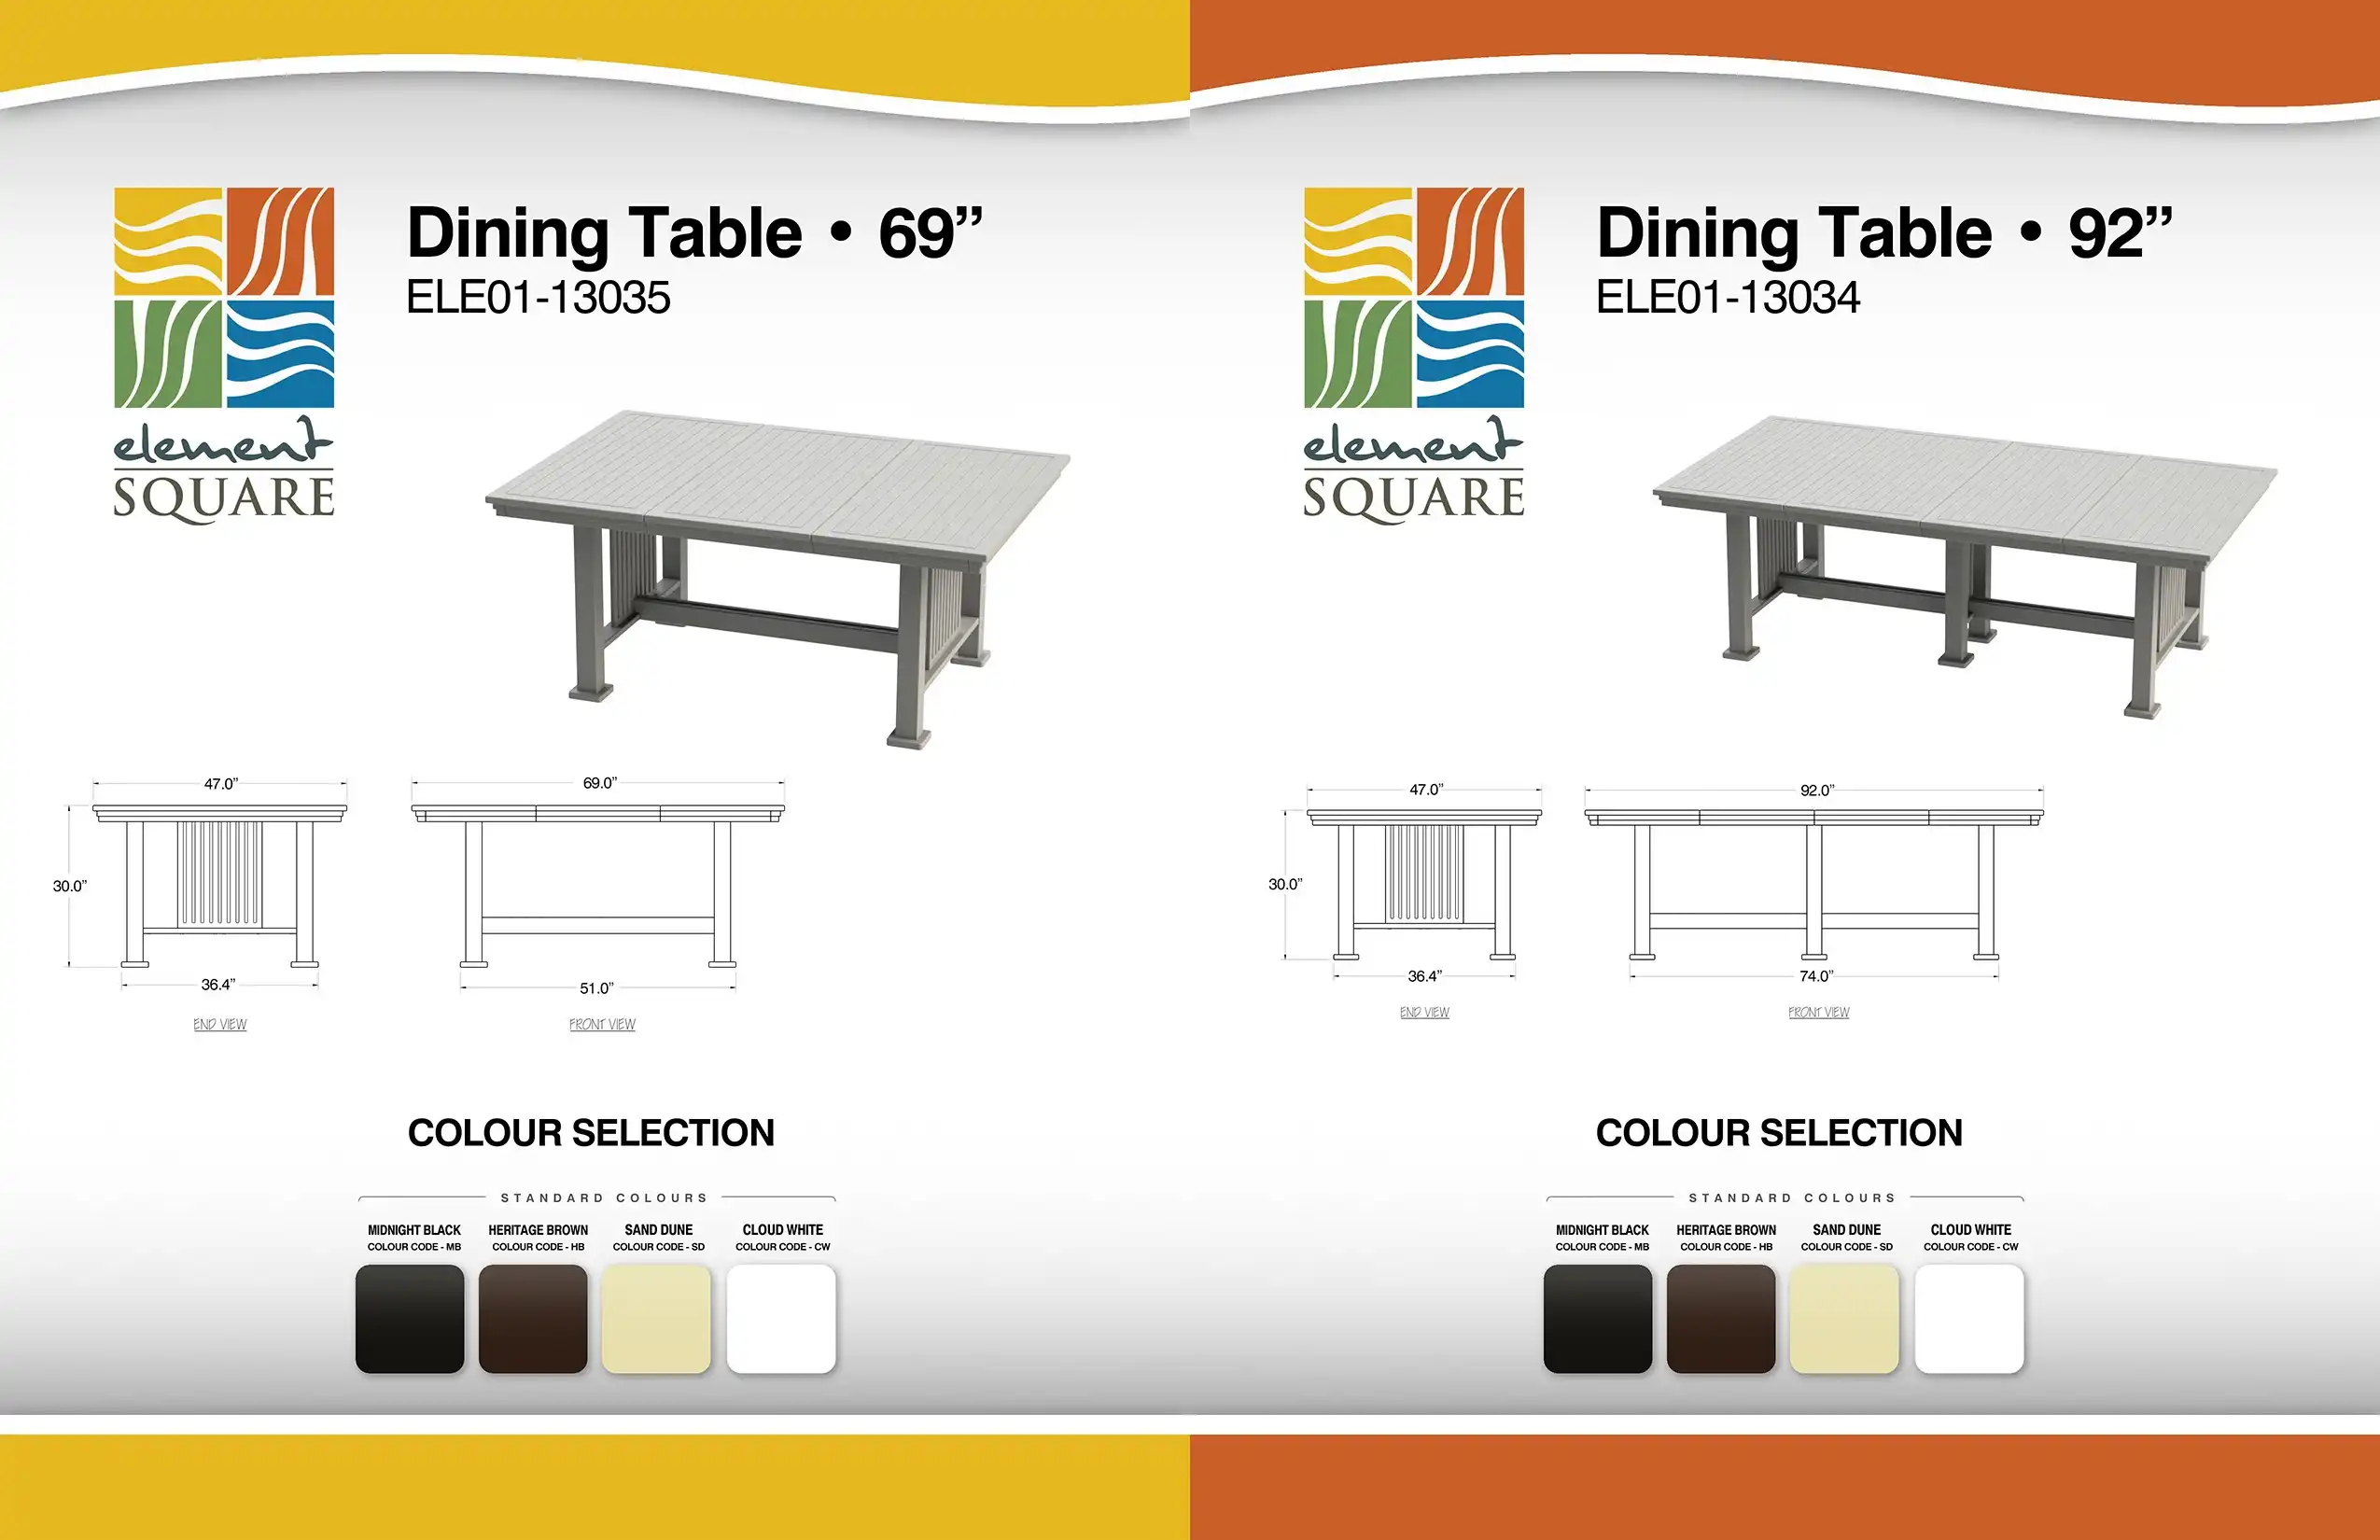 69 in & 92 in DINING TABLEs by Element Square